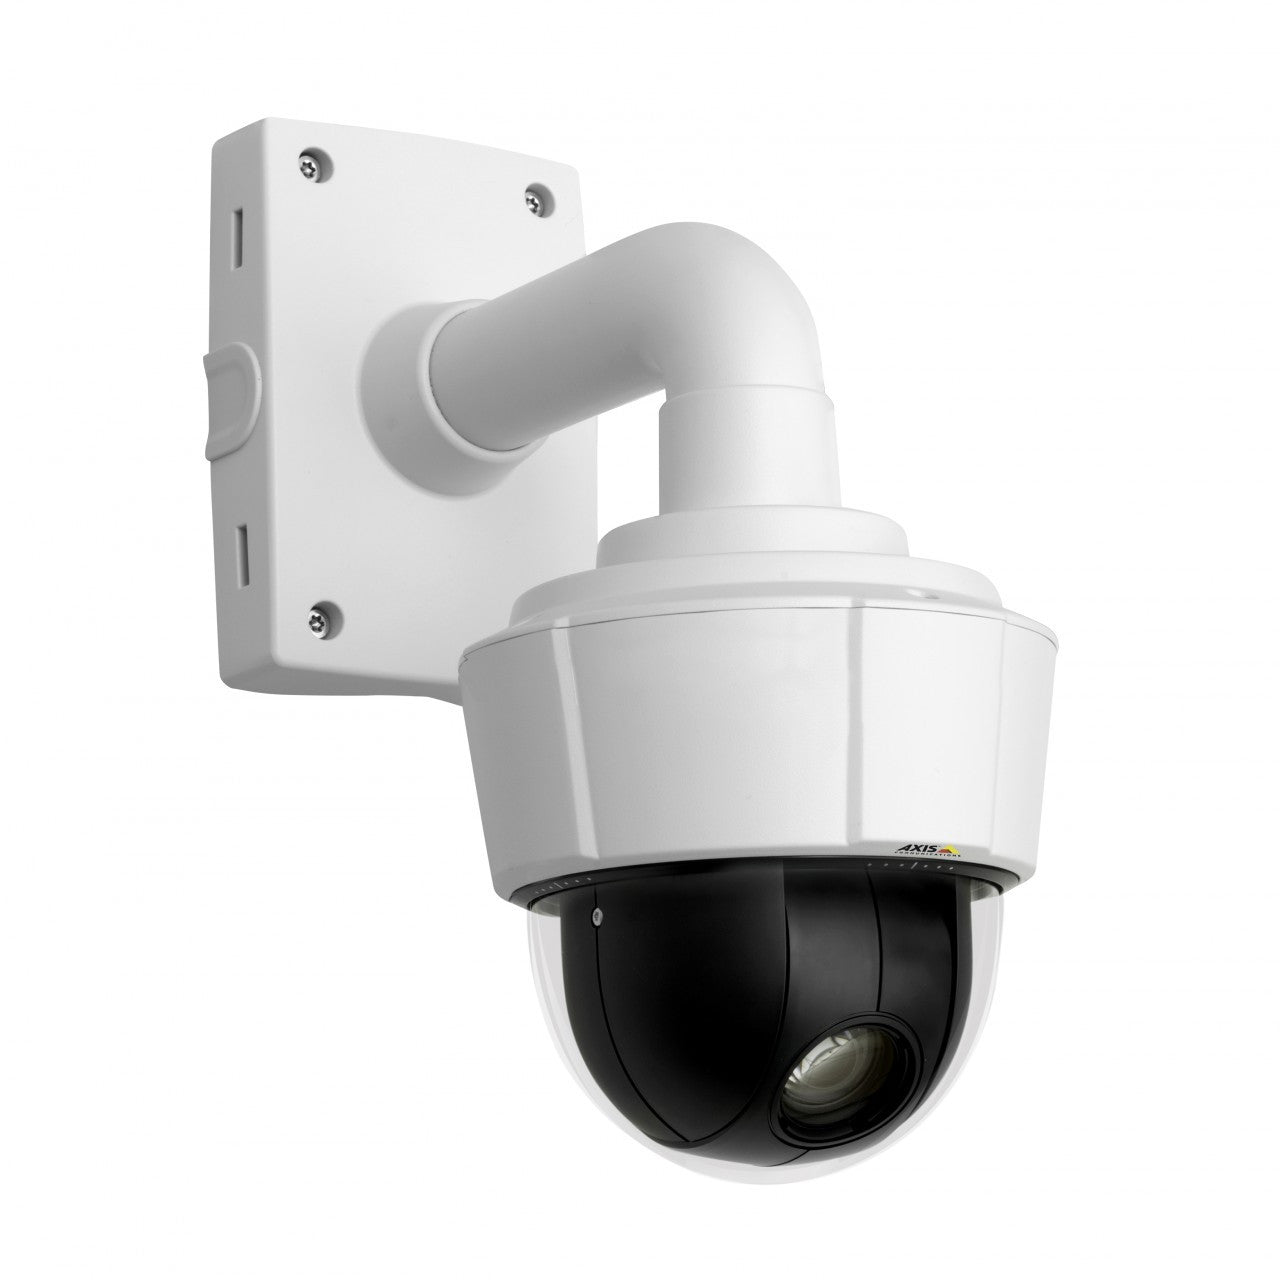 AXIS P5522 (0420-004) PTZ Dome Network Camera